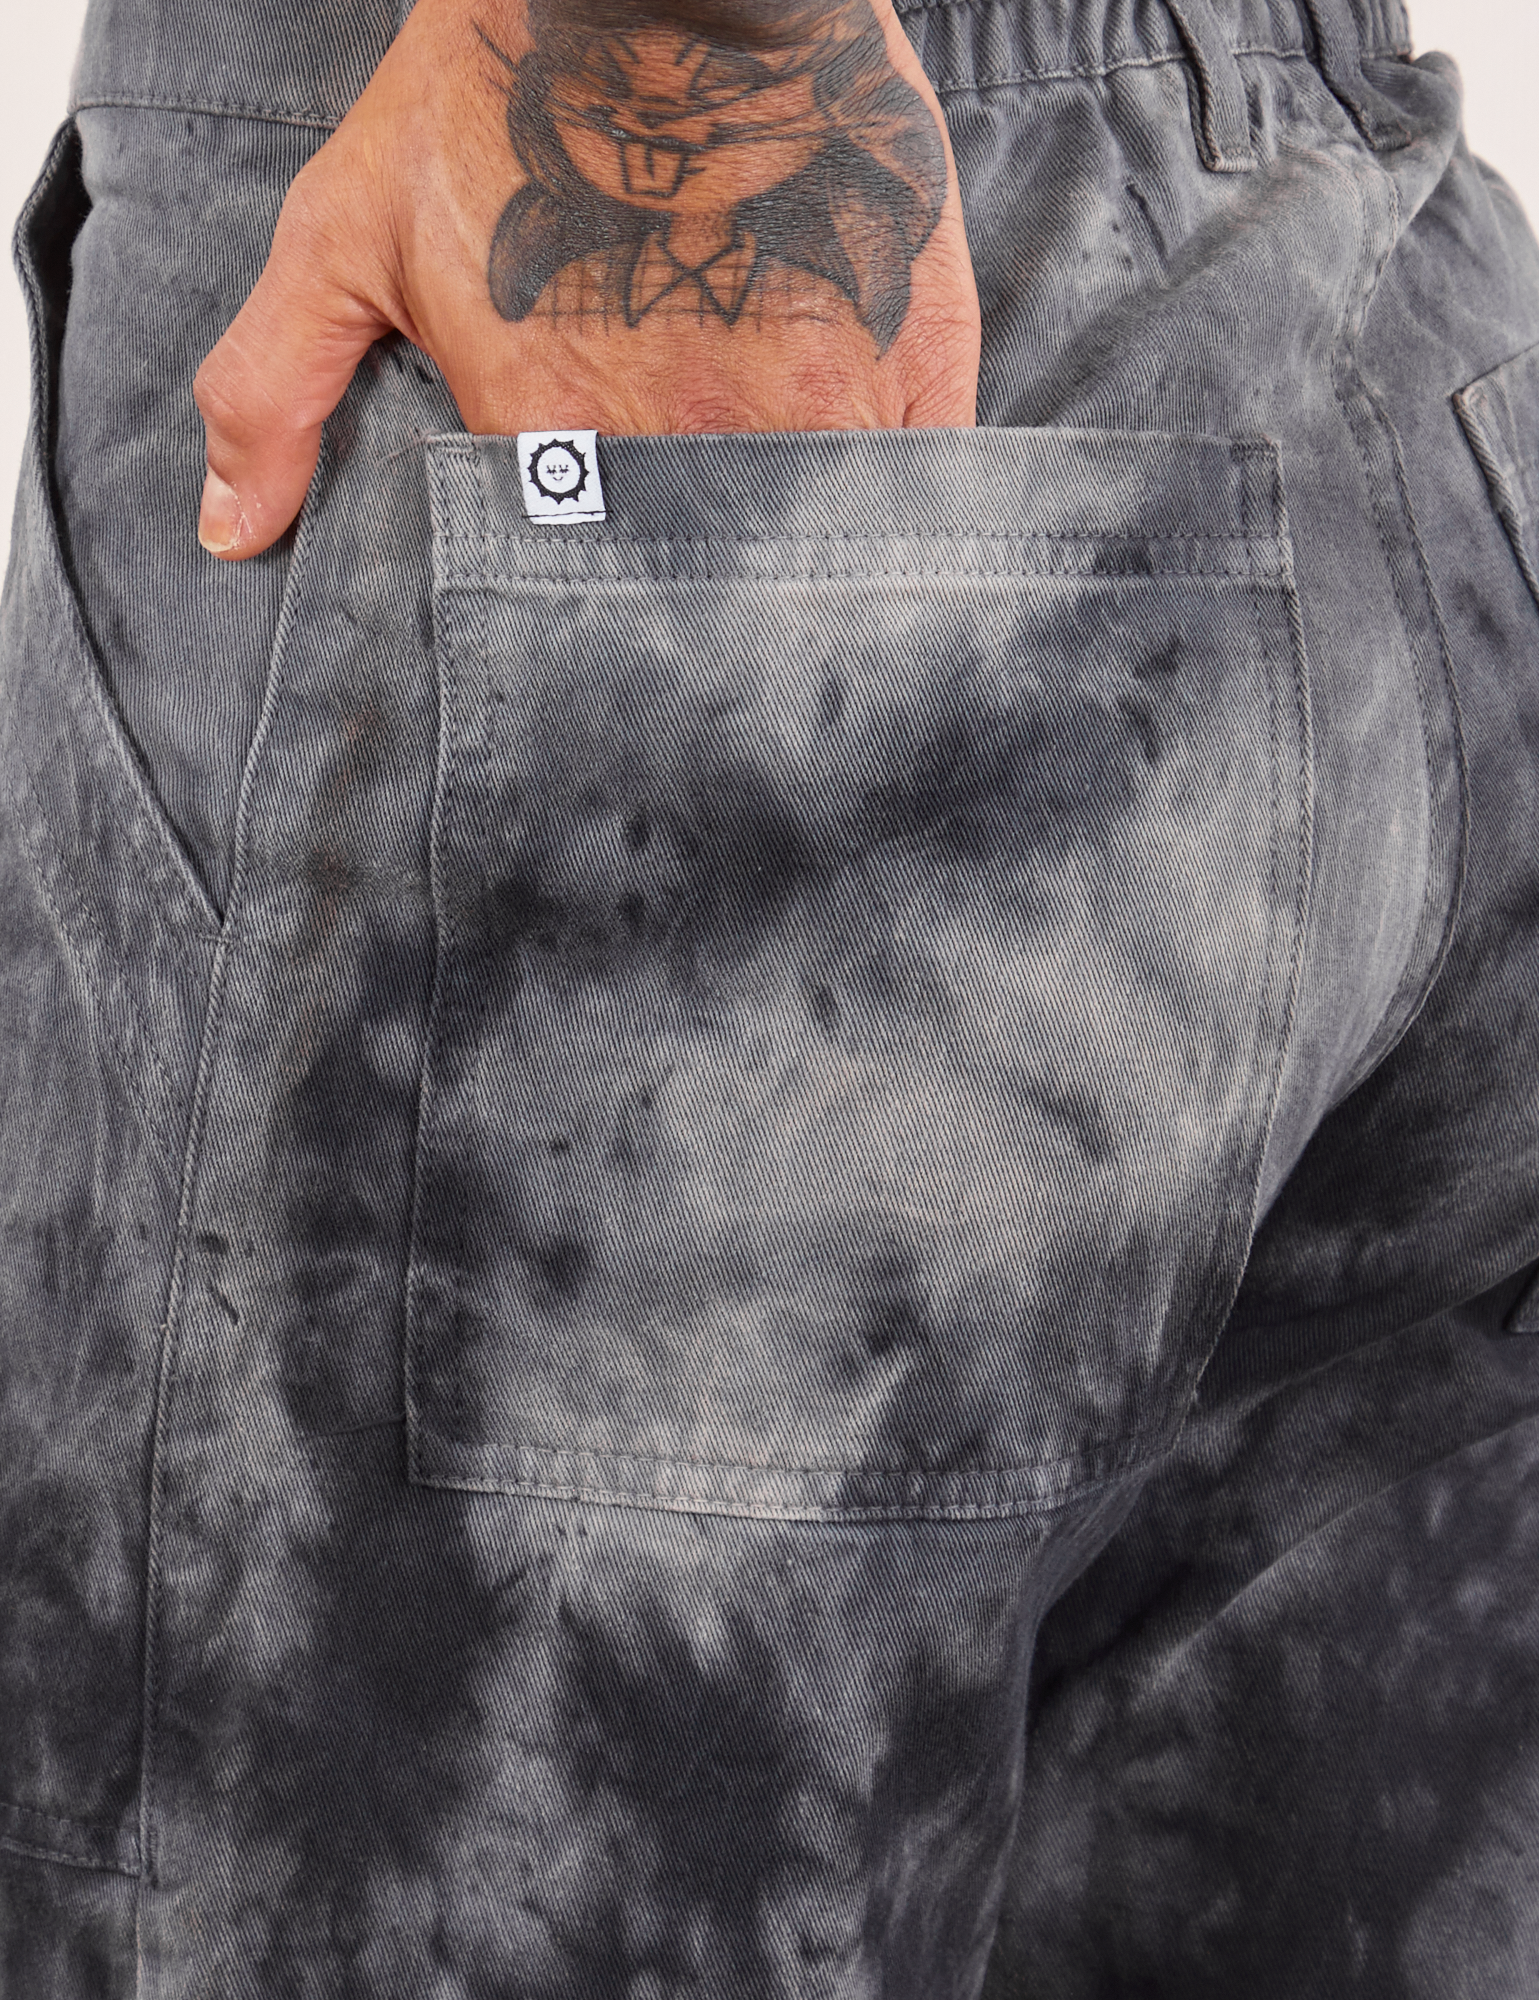 Back pocket close up of Black Magic Waters Work Pants. Jesse has their hand in the pocket.